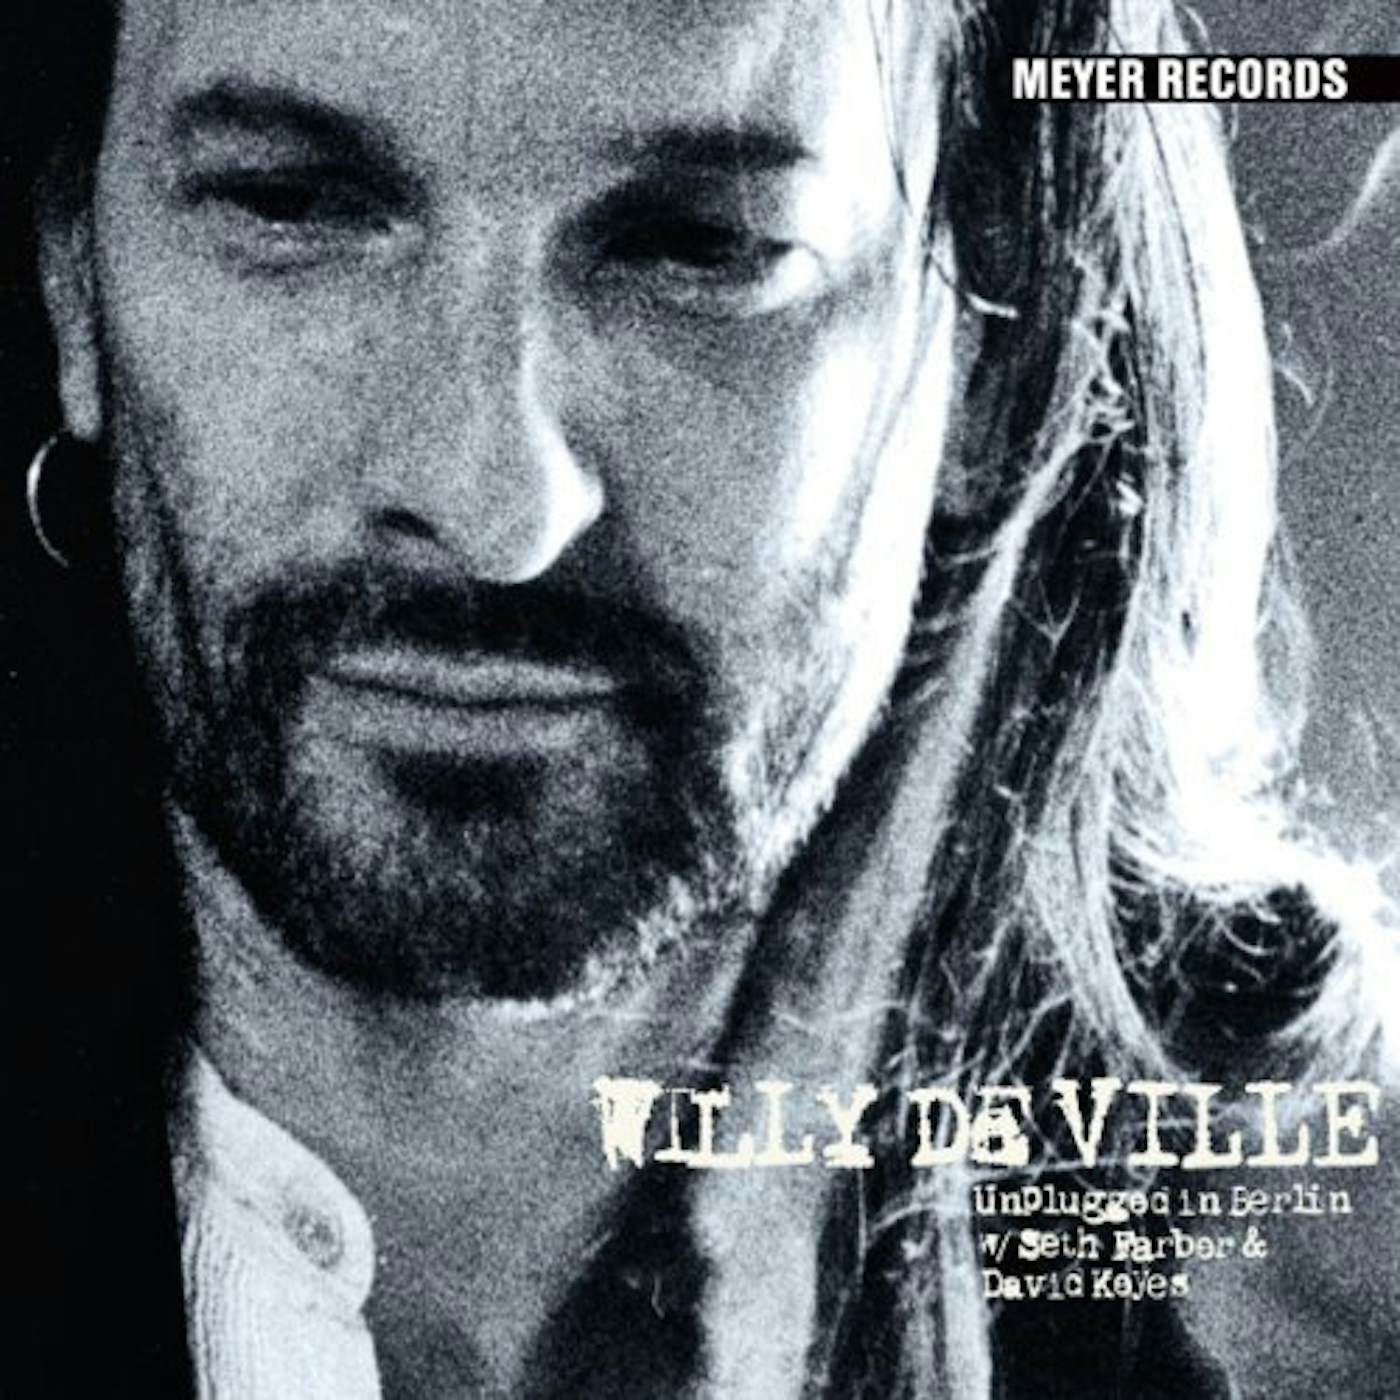 Willy DeVille Unplugged in Berlin Vinyl Record